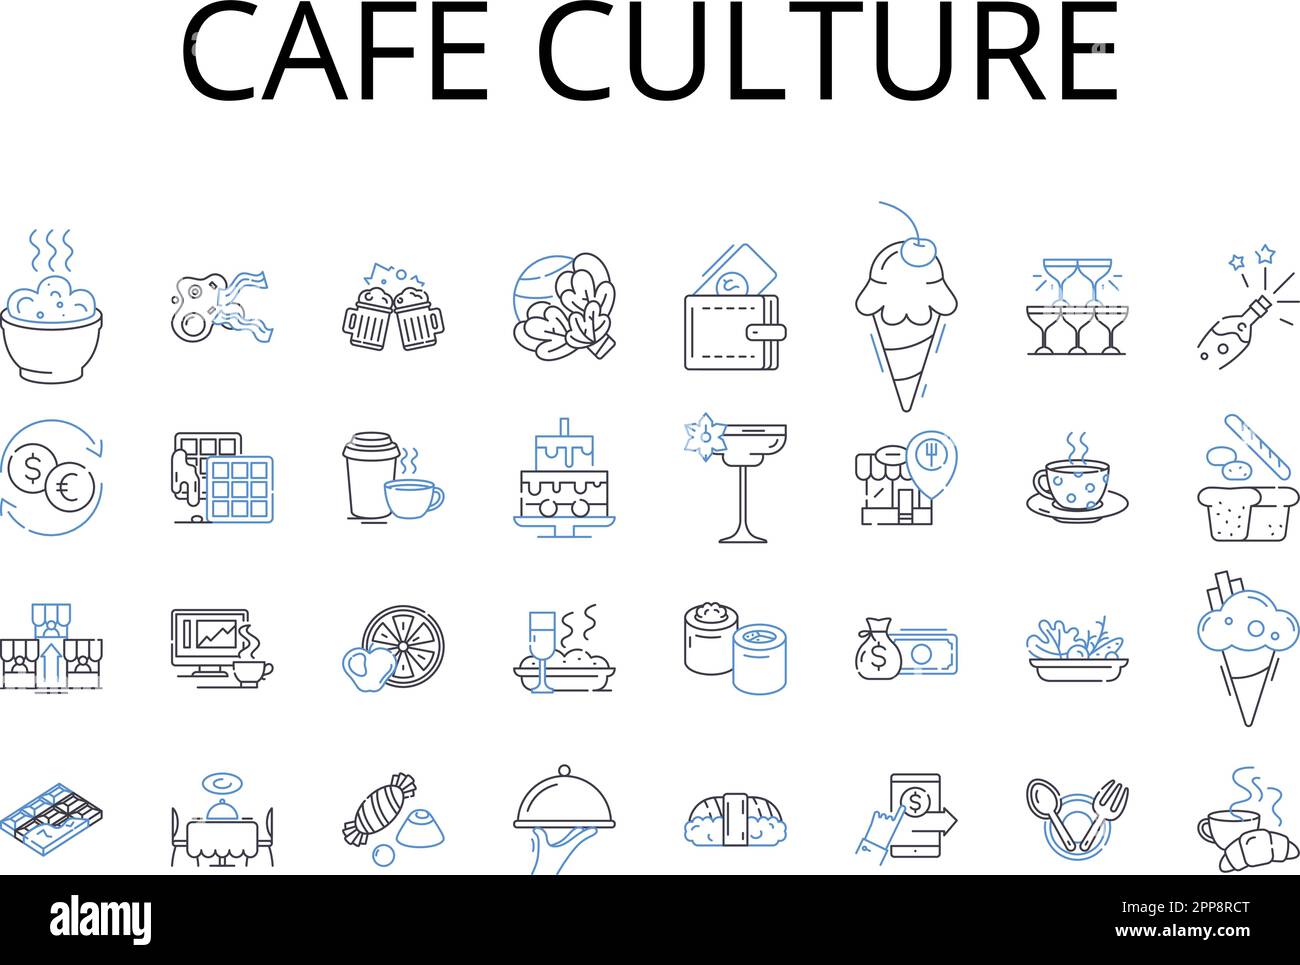 Cafe culture line icons collection. Food scene, Urban style, Street fashion, Music culture, Art community, Nightlife scene, Beach culture vector and Stock Vector